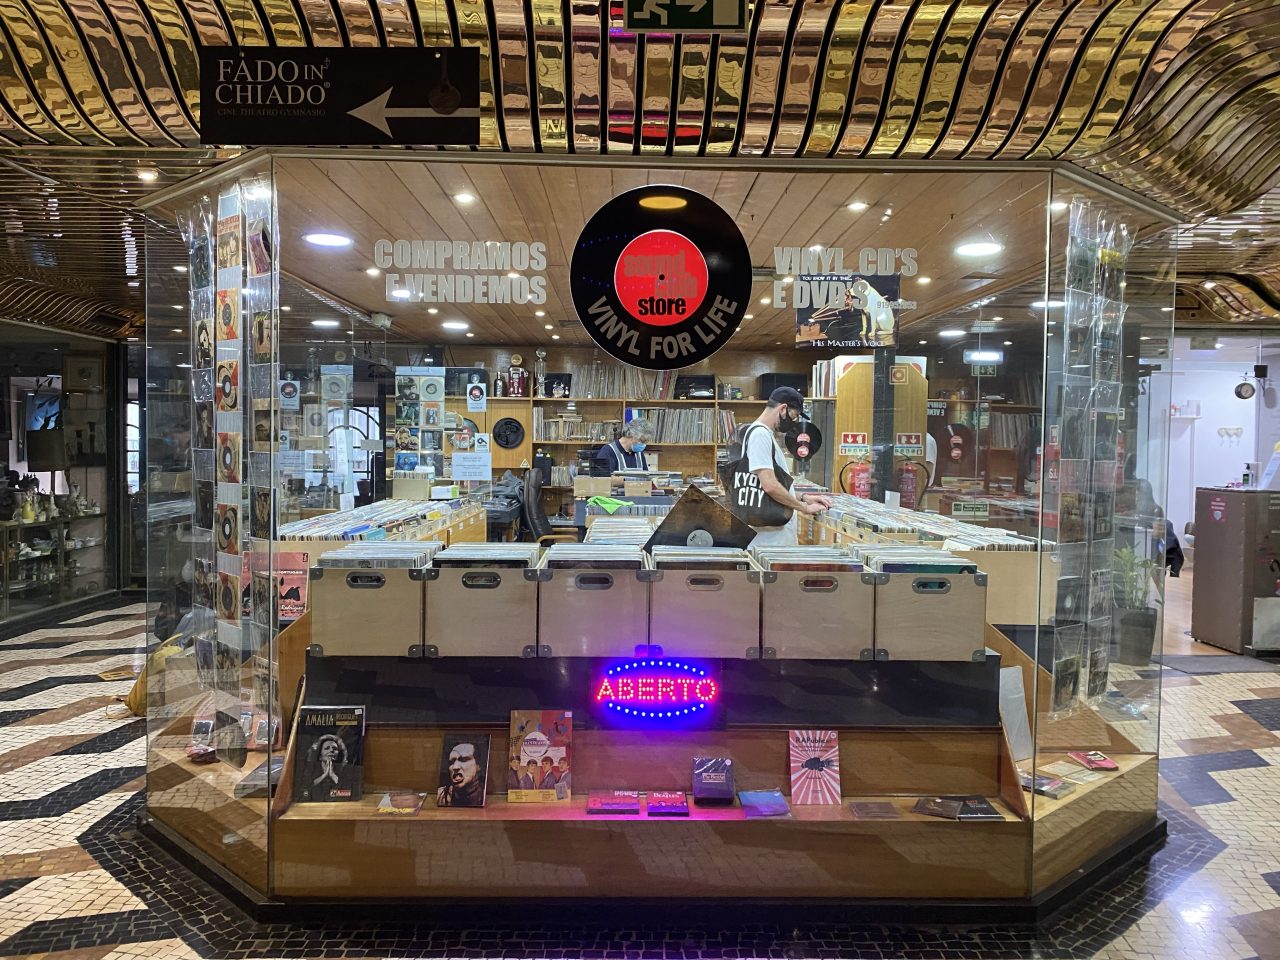 Megalopolis Rang upassende A guide to Lisbon's record stores - The Vinyl Factory